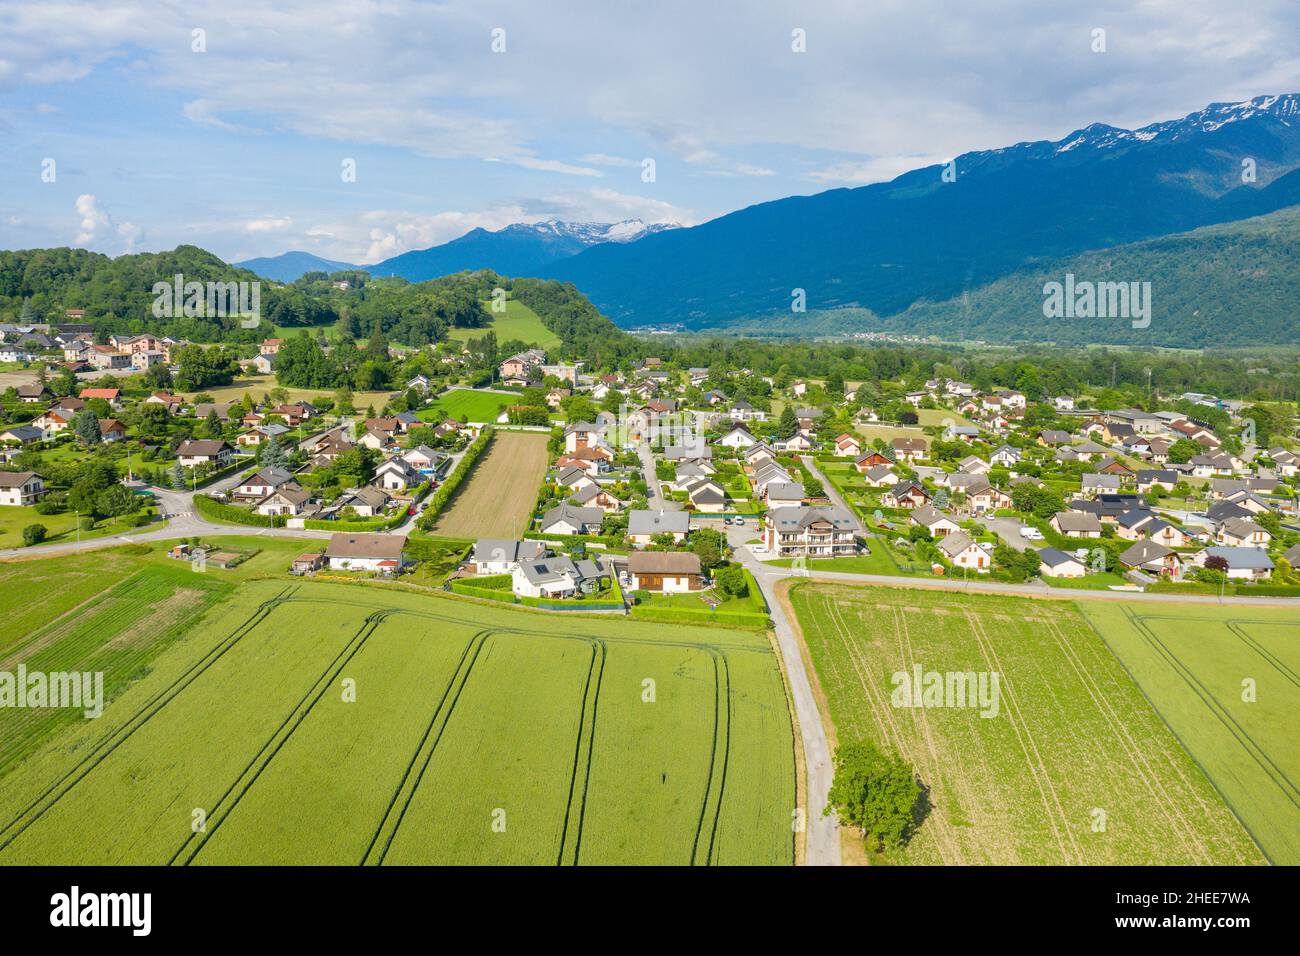 This landscape photo was taken in Europe, in France, in Isere, in the Alps, in summer. We can see the town of Gresy sur Isere on the edge of wheat fie Stock Photo